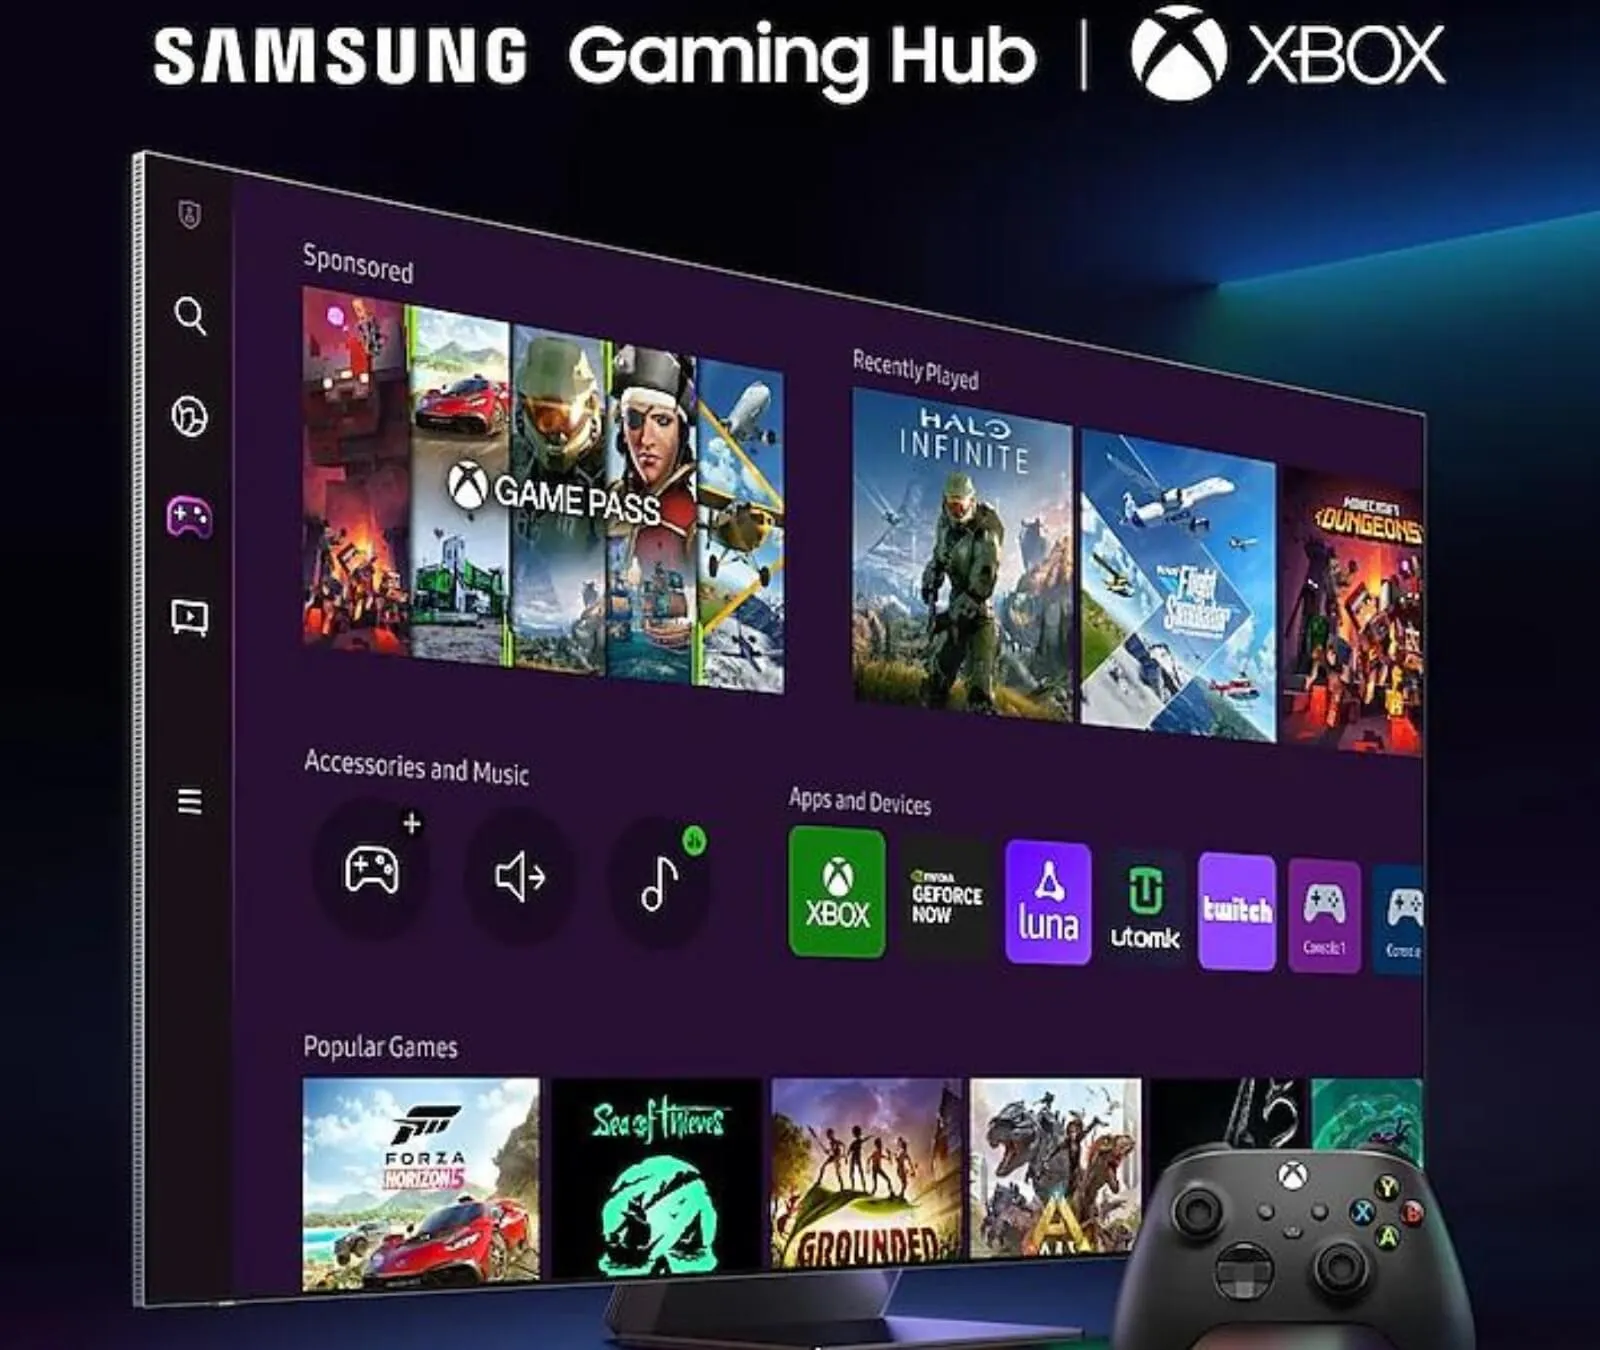 Gaming Hub features on the TV screen